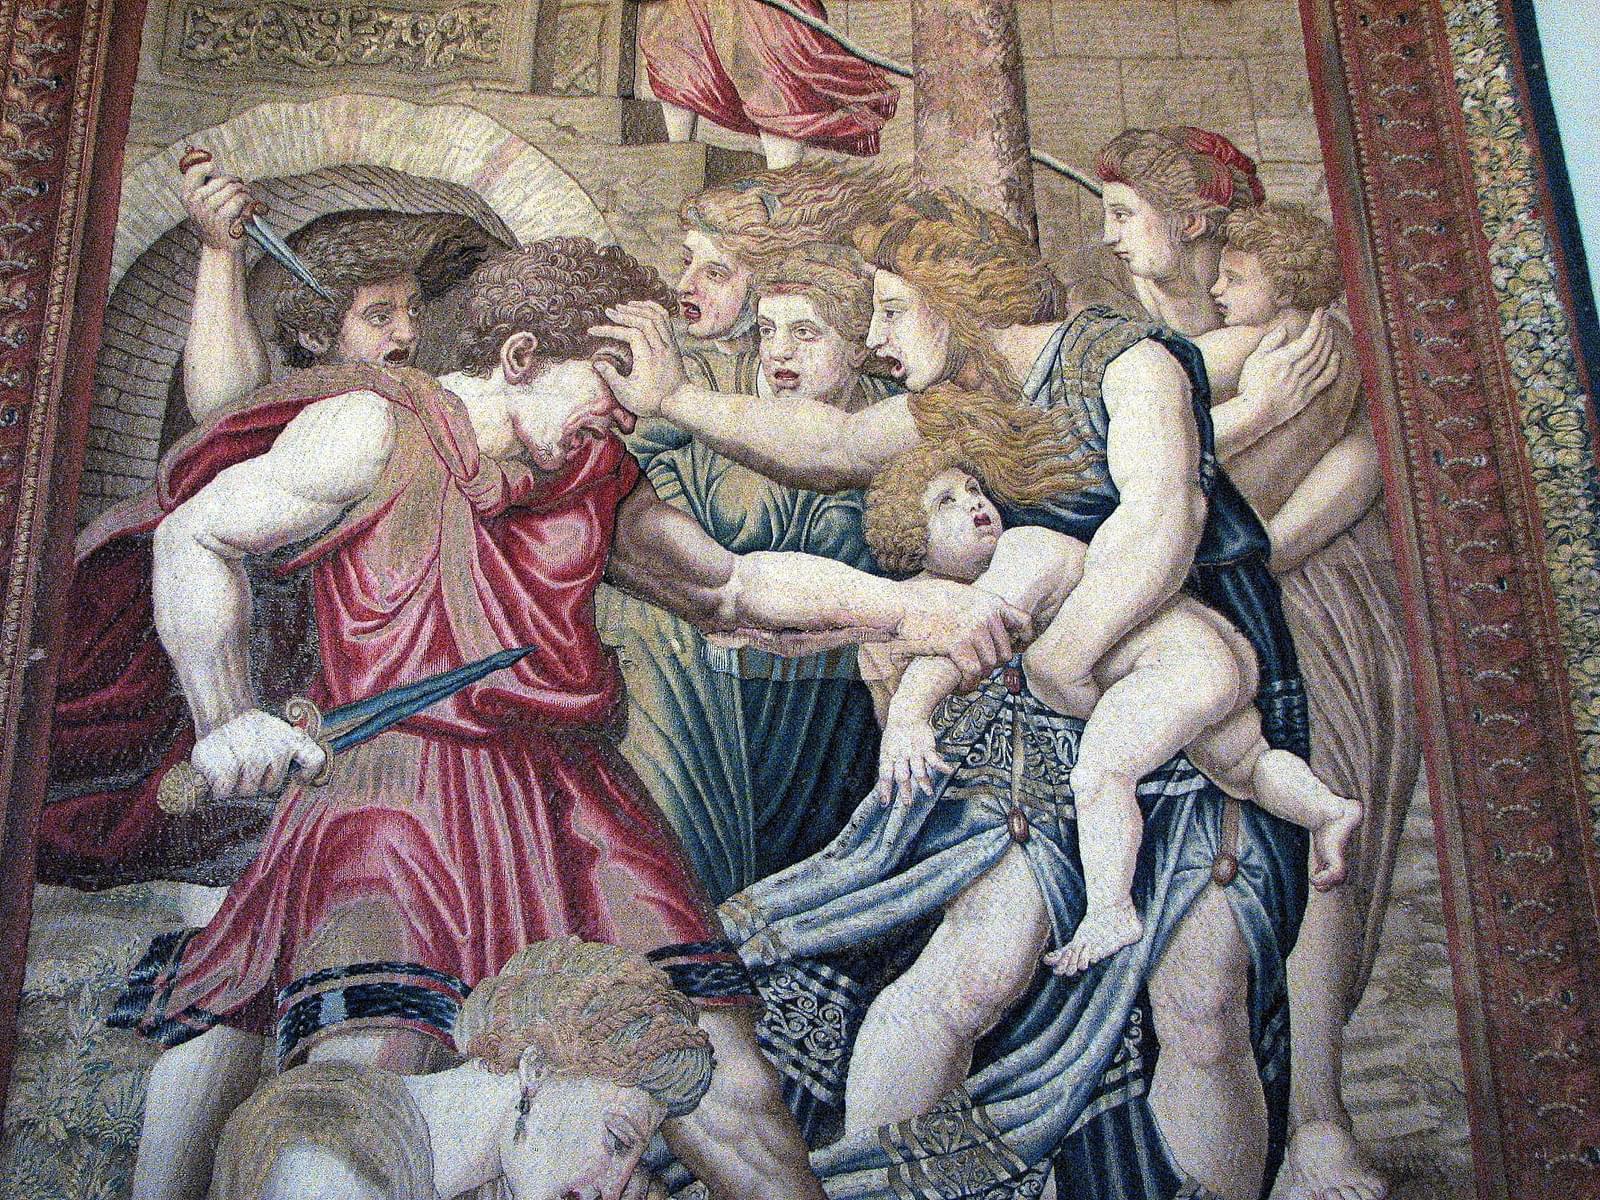 Slaughter Of The Innocents